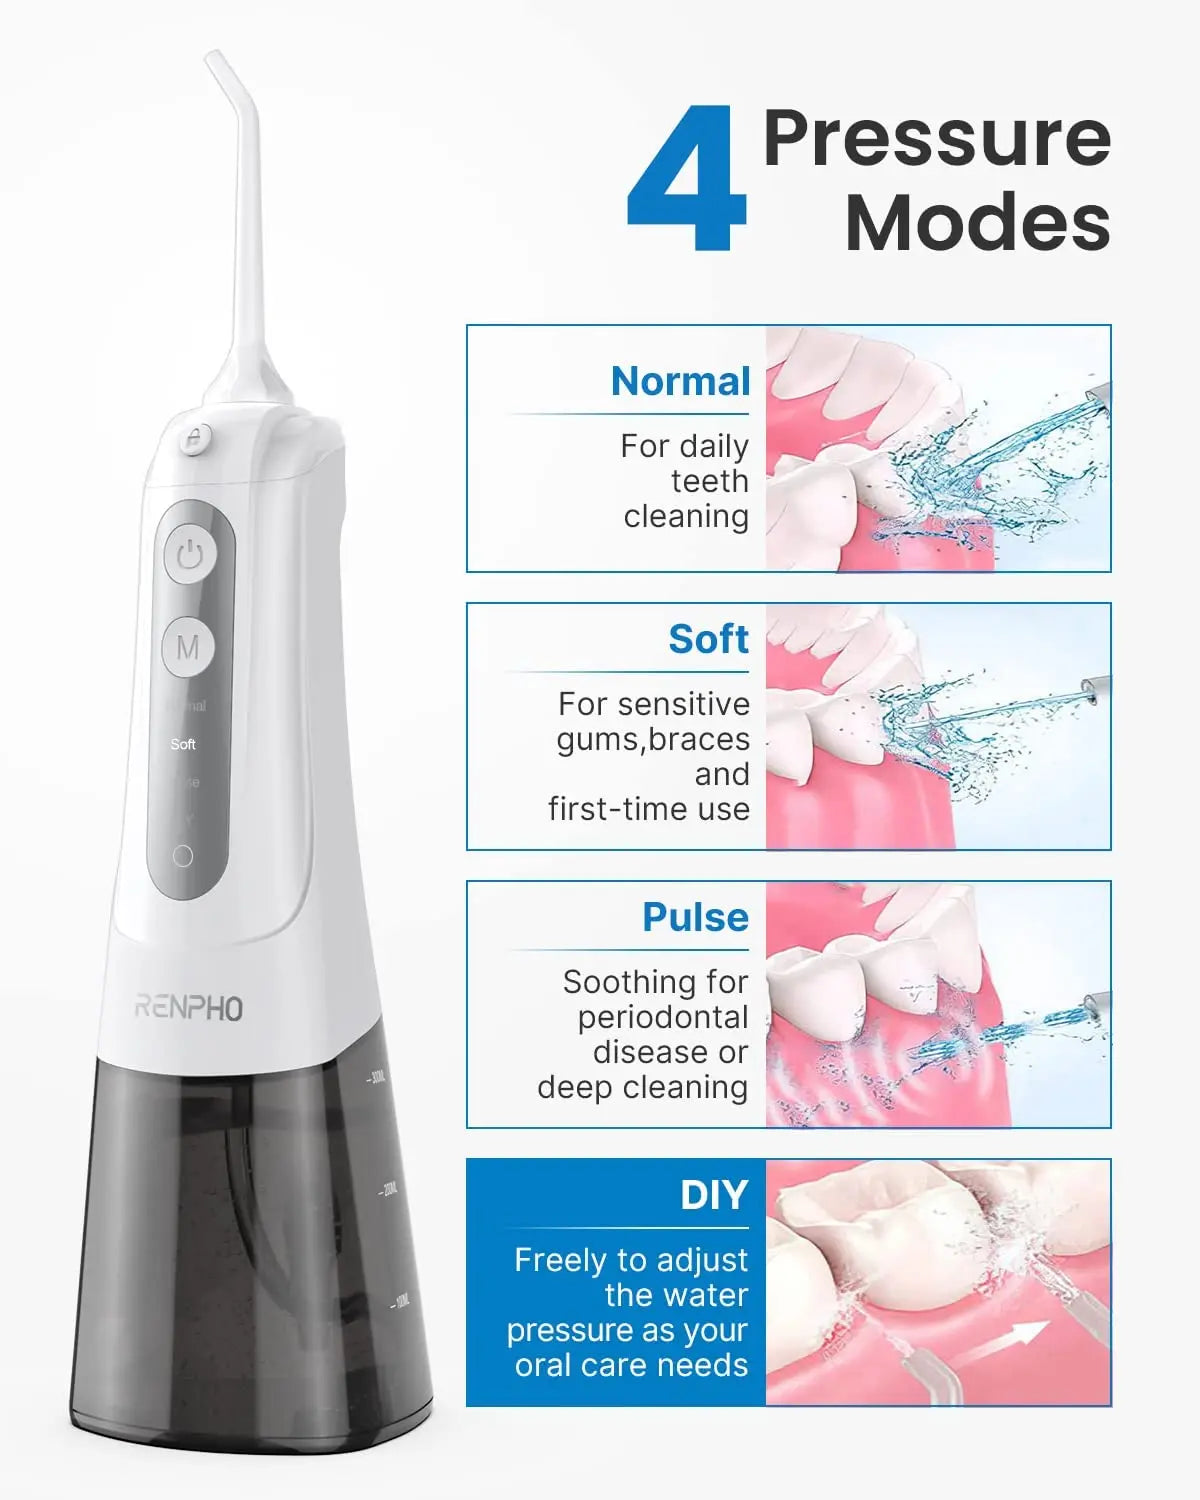 Image of a Renpho EU Cordless Water Flosser displaying its four pressure modes. The top left features an image of the high-pressure water flosser with its buttons visible. To the right are the modes: "Normal" for daily teeth cleaning, "Soft" for sensitive gums and braces, "Pulse" for deep cleaning, and "DIY" for customizable pressure.